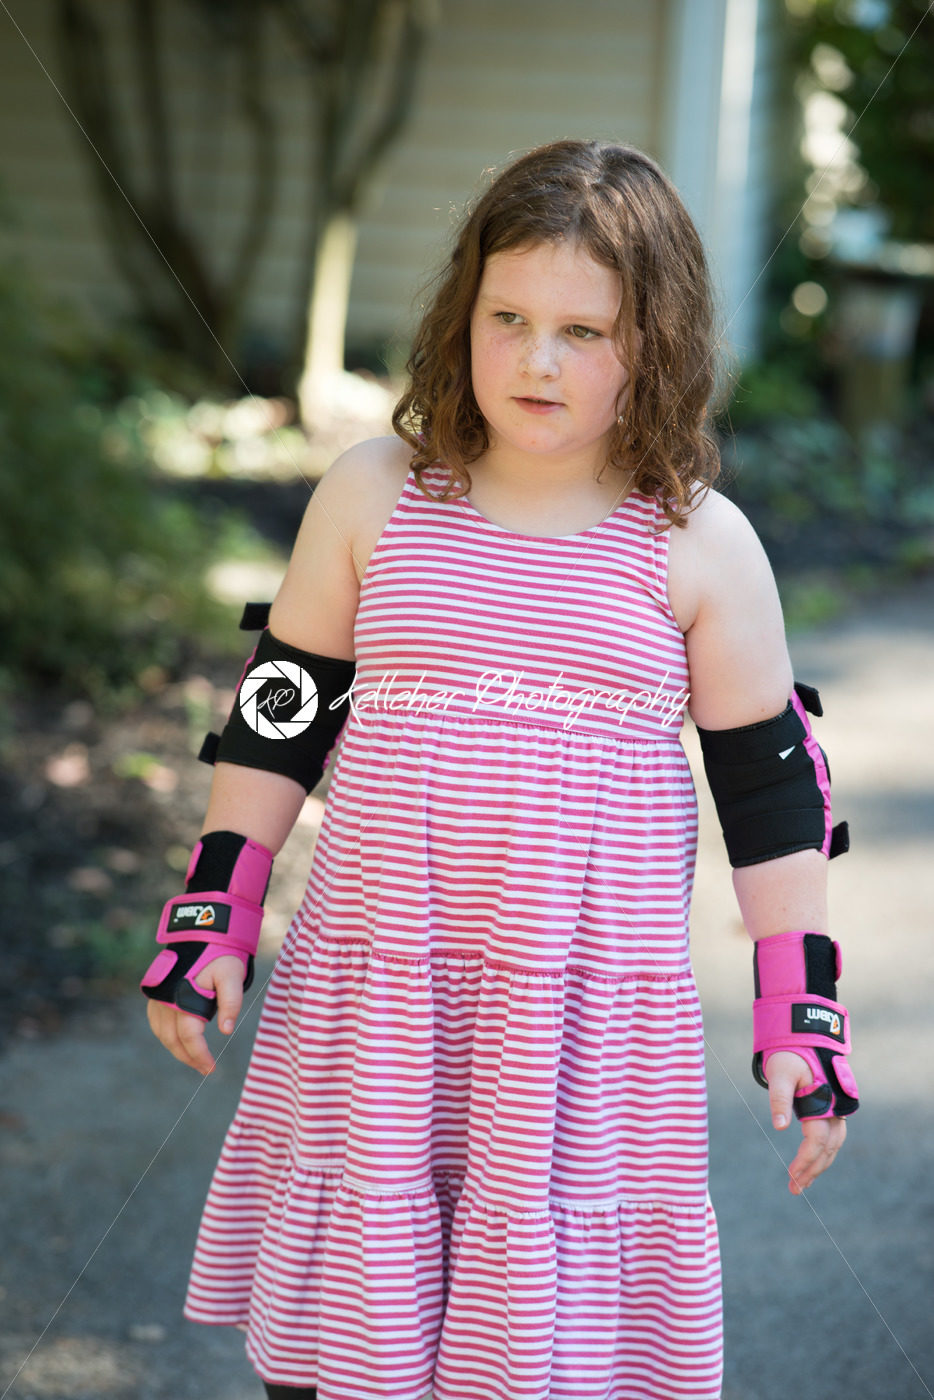 Young girl outside learning to riding on roller skates on driveway wearing protective elbow, wrist and knee pads - Kelleher Photography Store